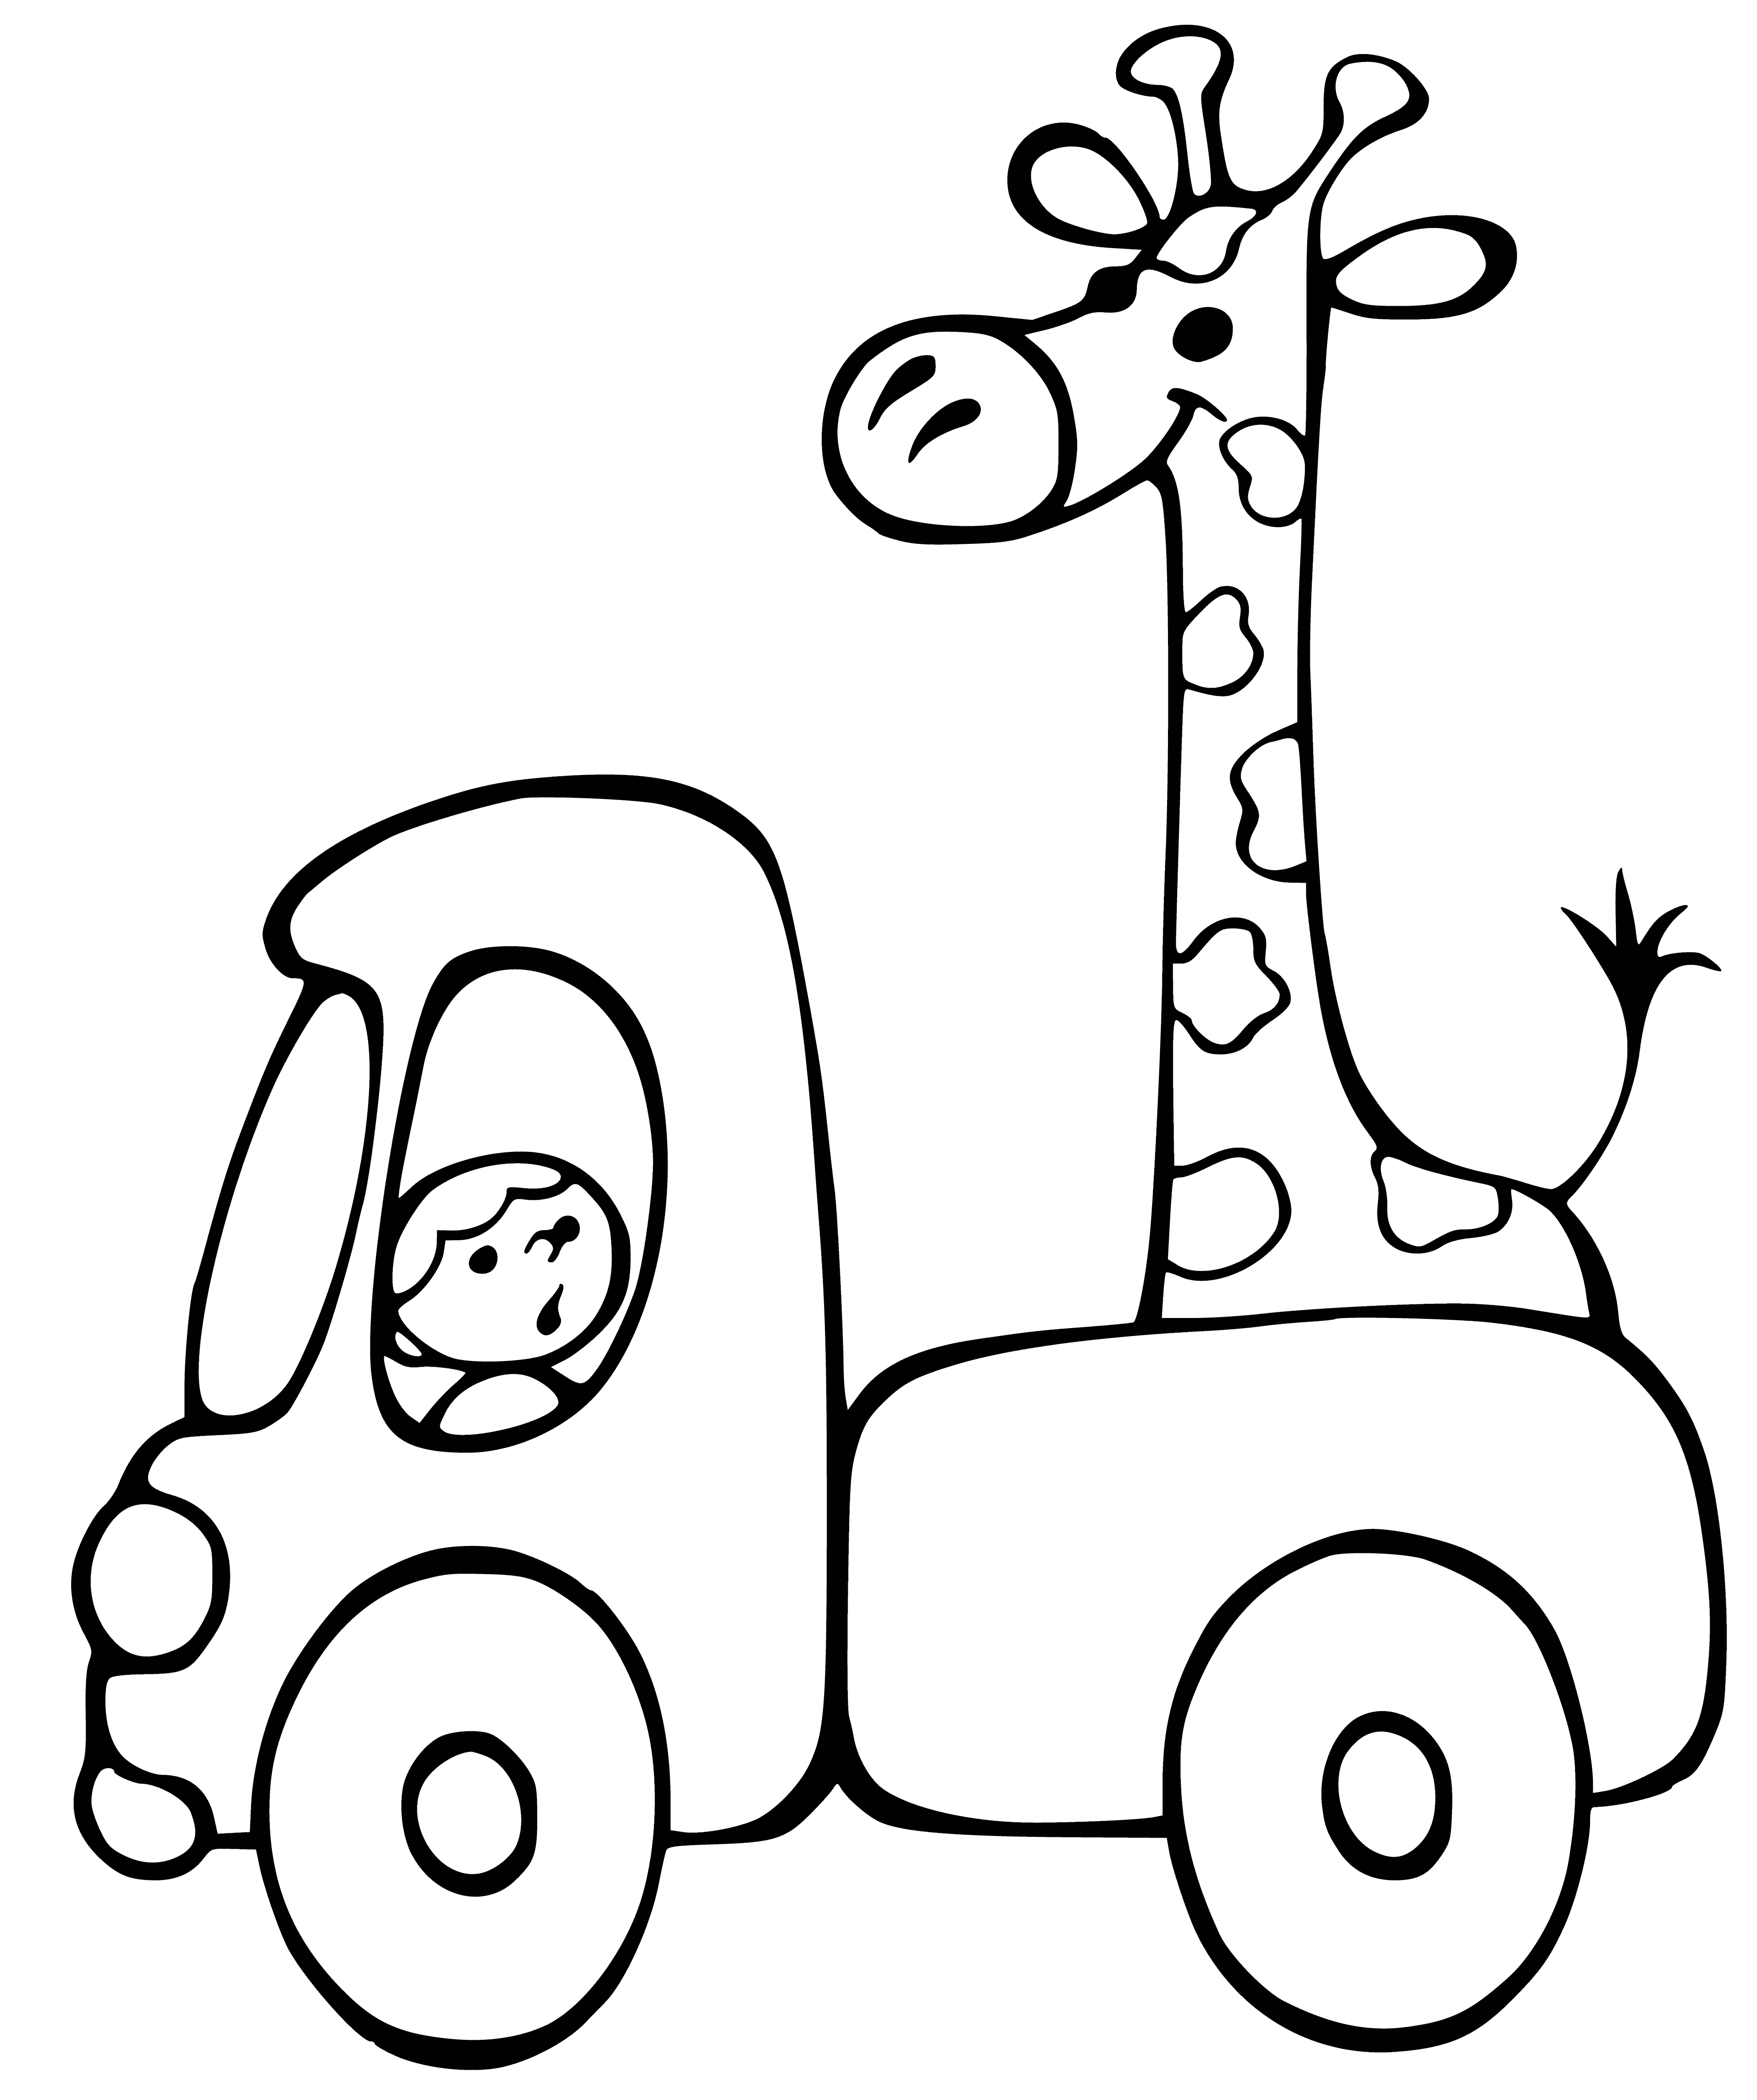 coloring page: Giraffe sticking out sunroof, head close to ceiling; tall body, long legs.